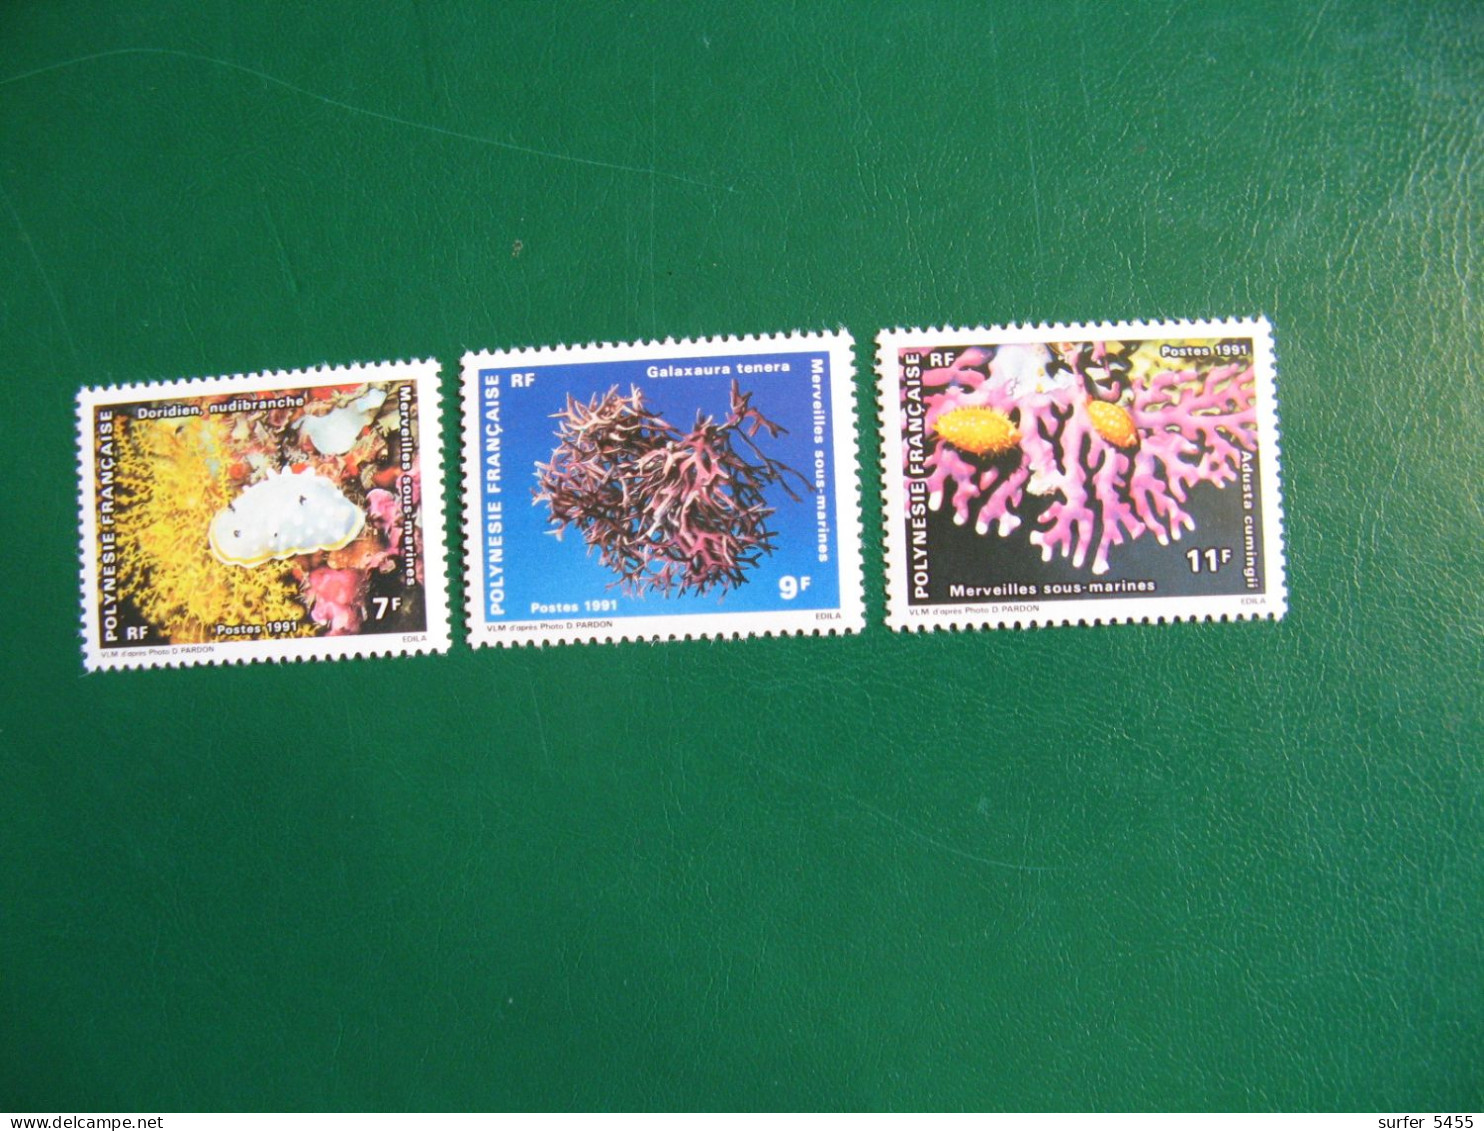 P0LYNESIE YVERT PO ORDINAIRE N° 376/378 TIMBRES NEUFS ** LUXE - MNH - SERIE COMPLETE- COTE 1,30 EURO - Ungebraucht